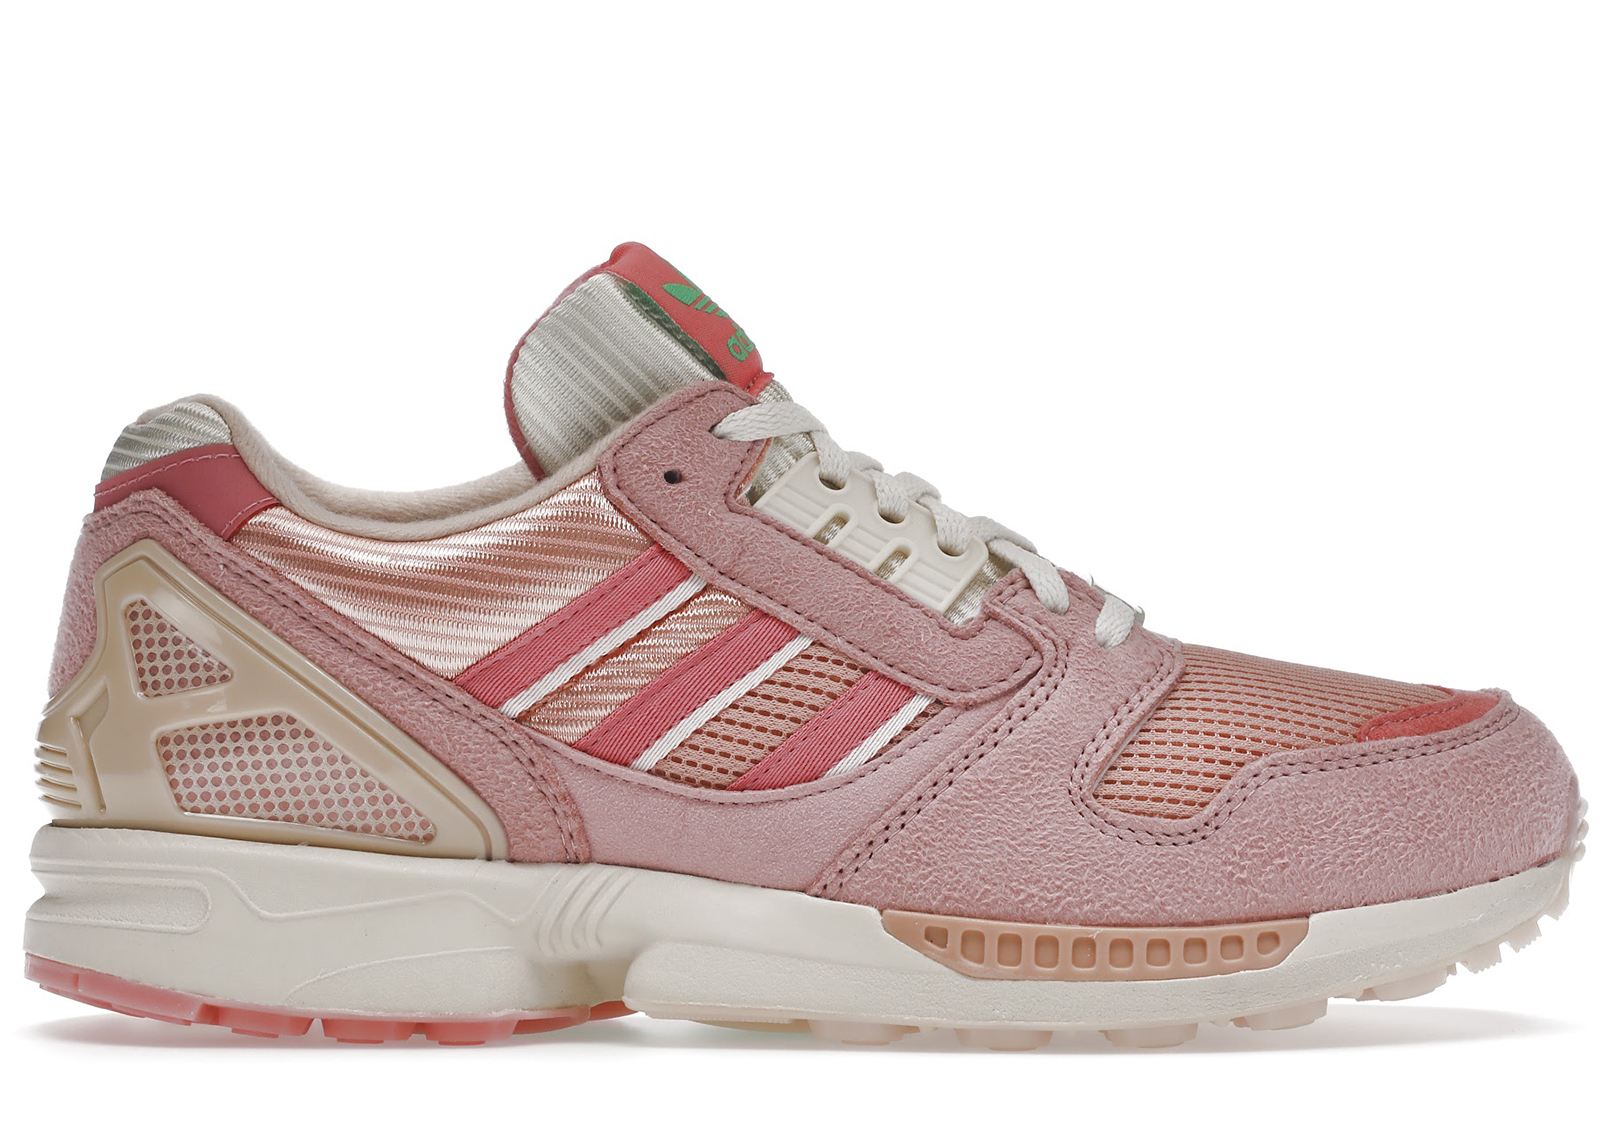 adidas ZX 8000 Starwberry Latte Men's - GY4648 - US